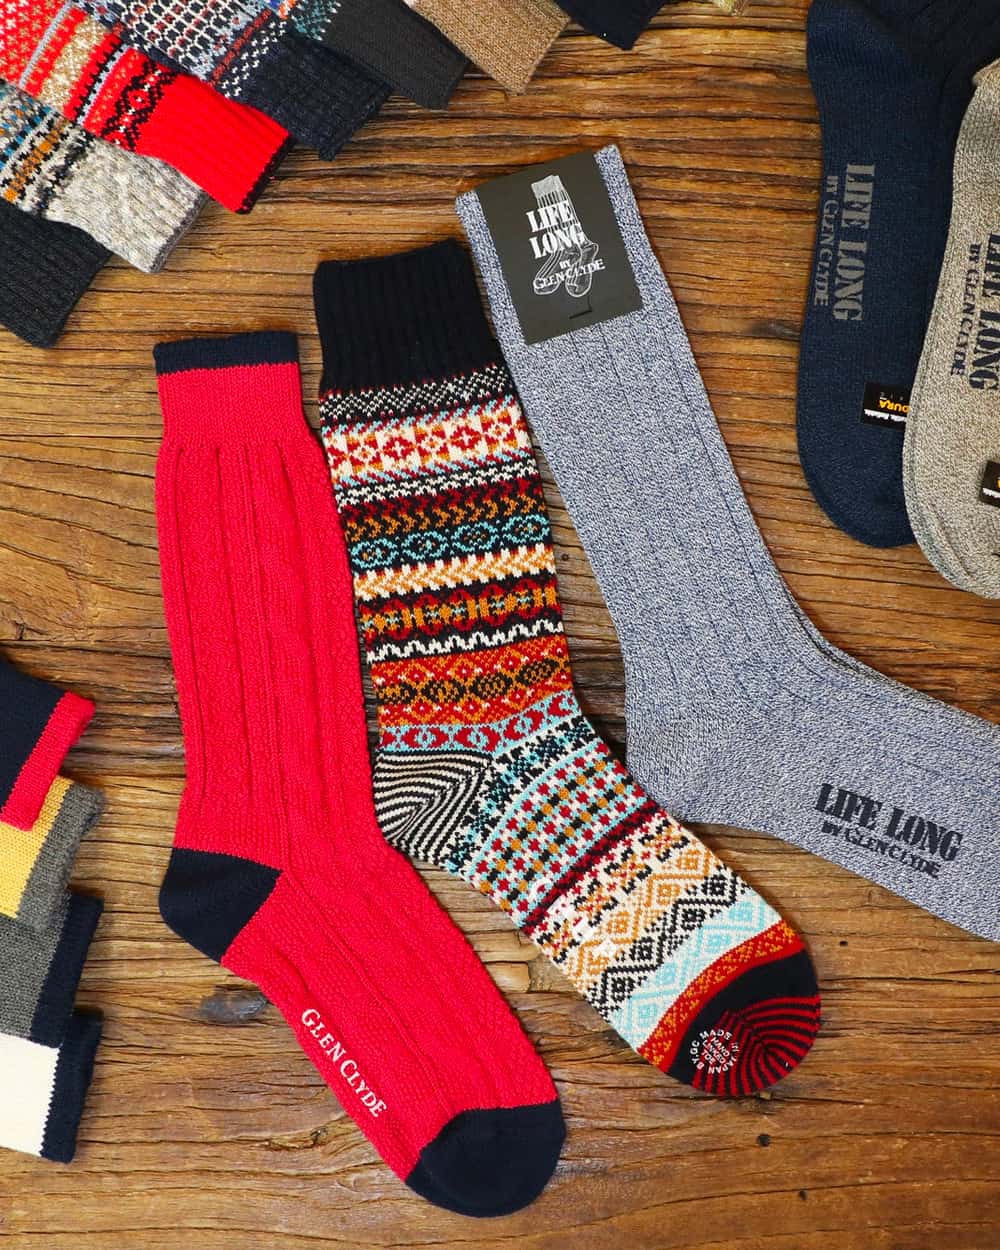 A selection of men's Chup socks in plain ribbed and patterned styles laid on wood